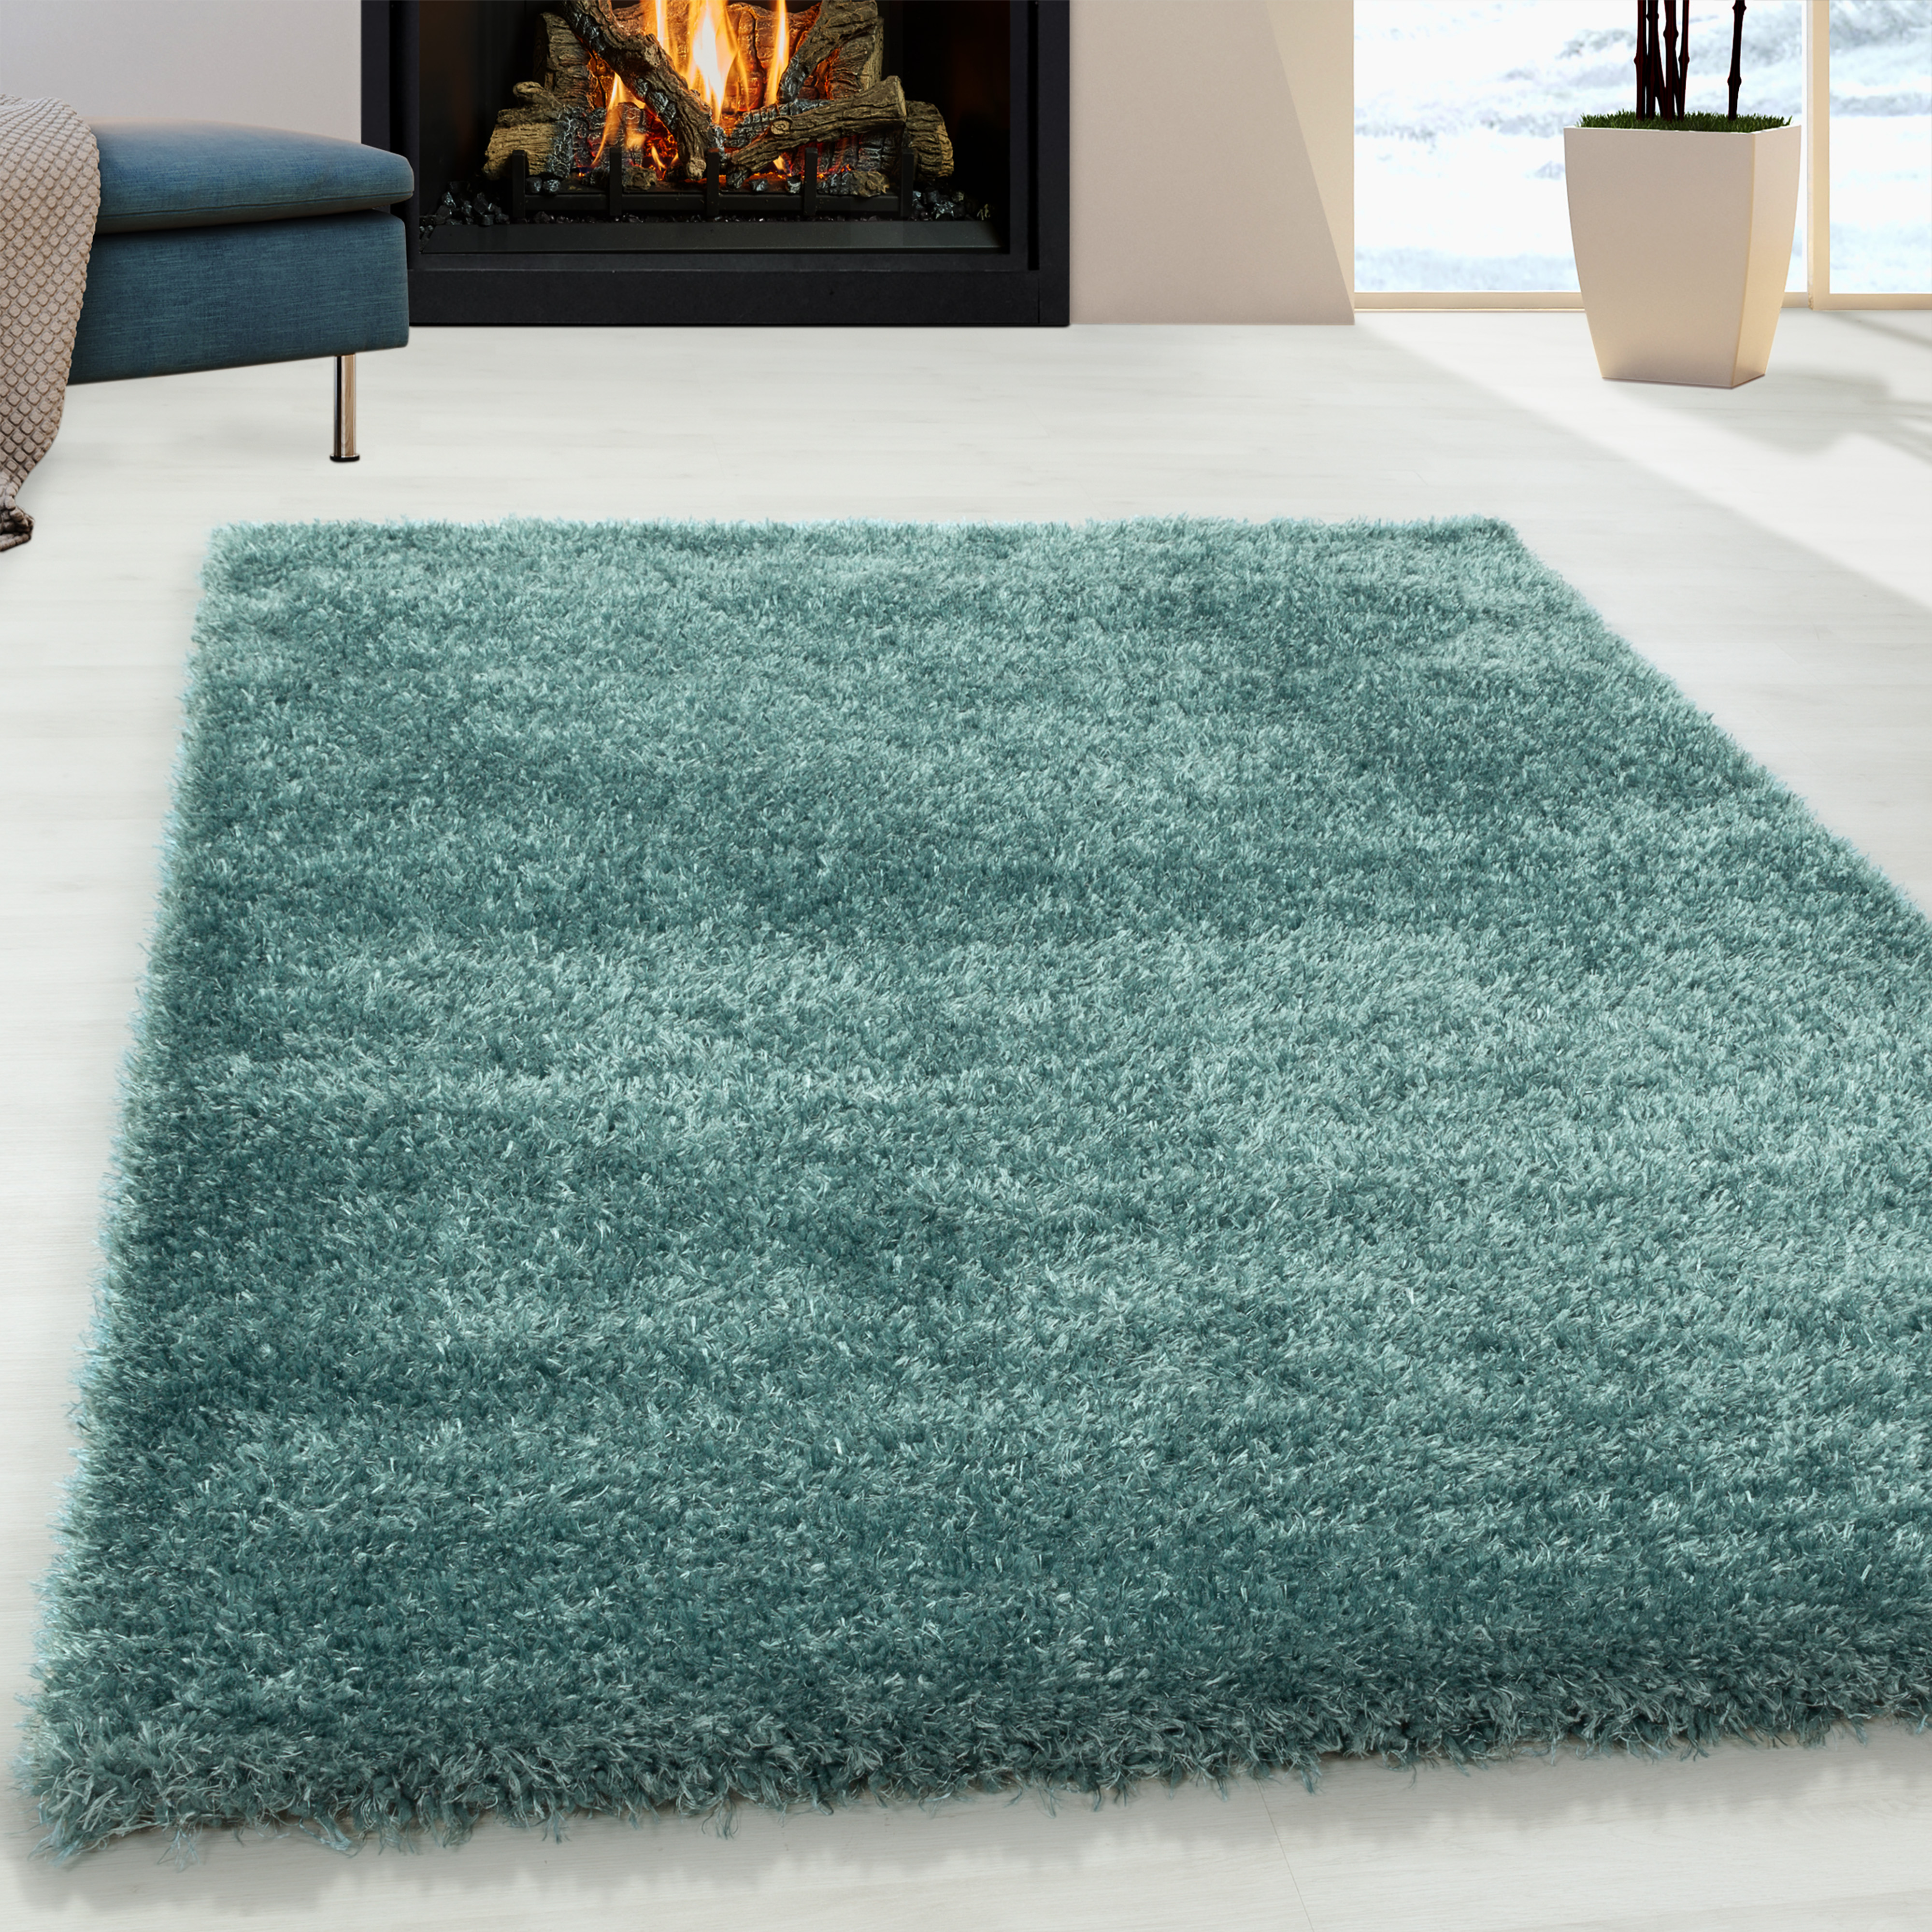 Excellent Shaggy Rugs